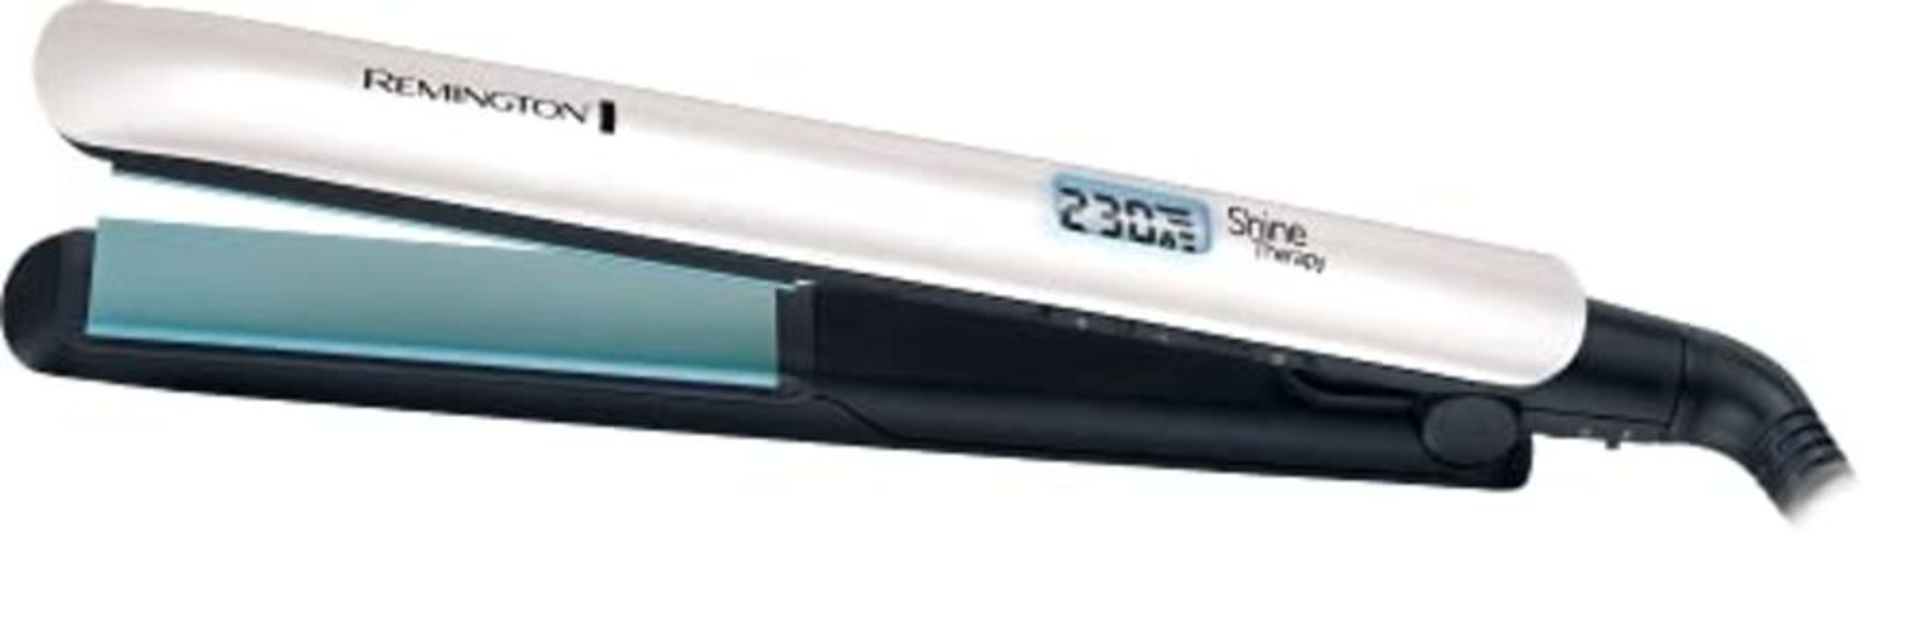 Remington Shine Therapy Advanced Ceramic Hair Straighteners with Morrocan Argan Oil fo